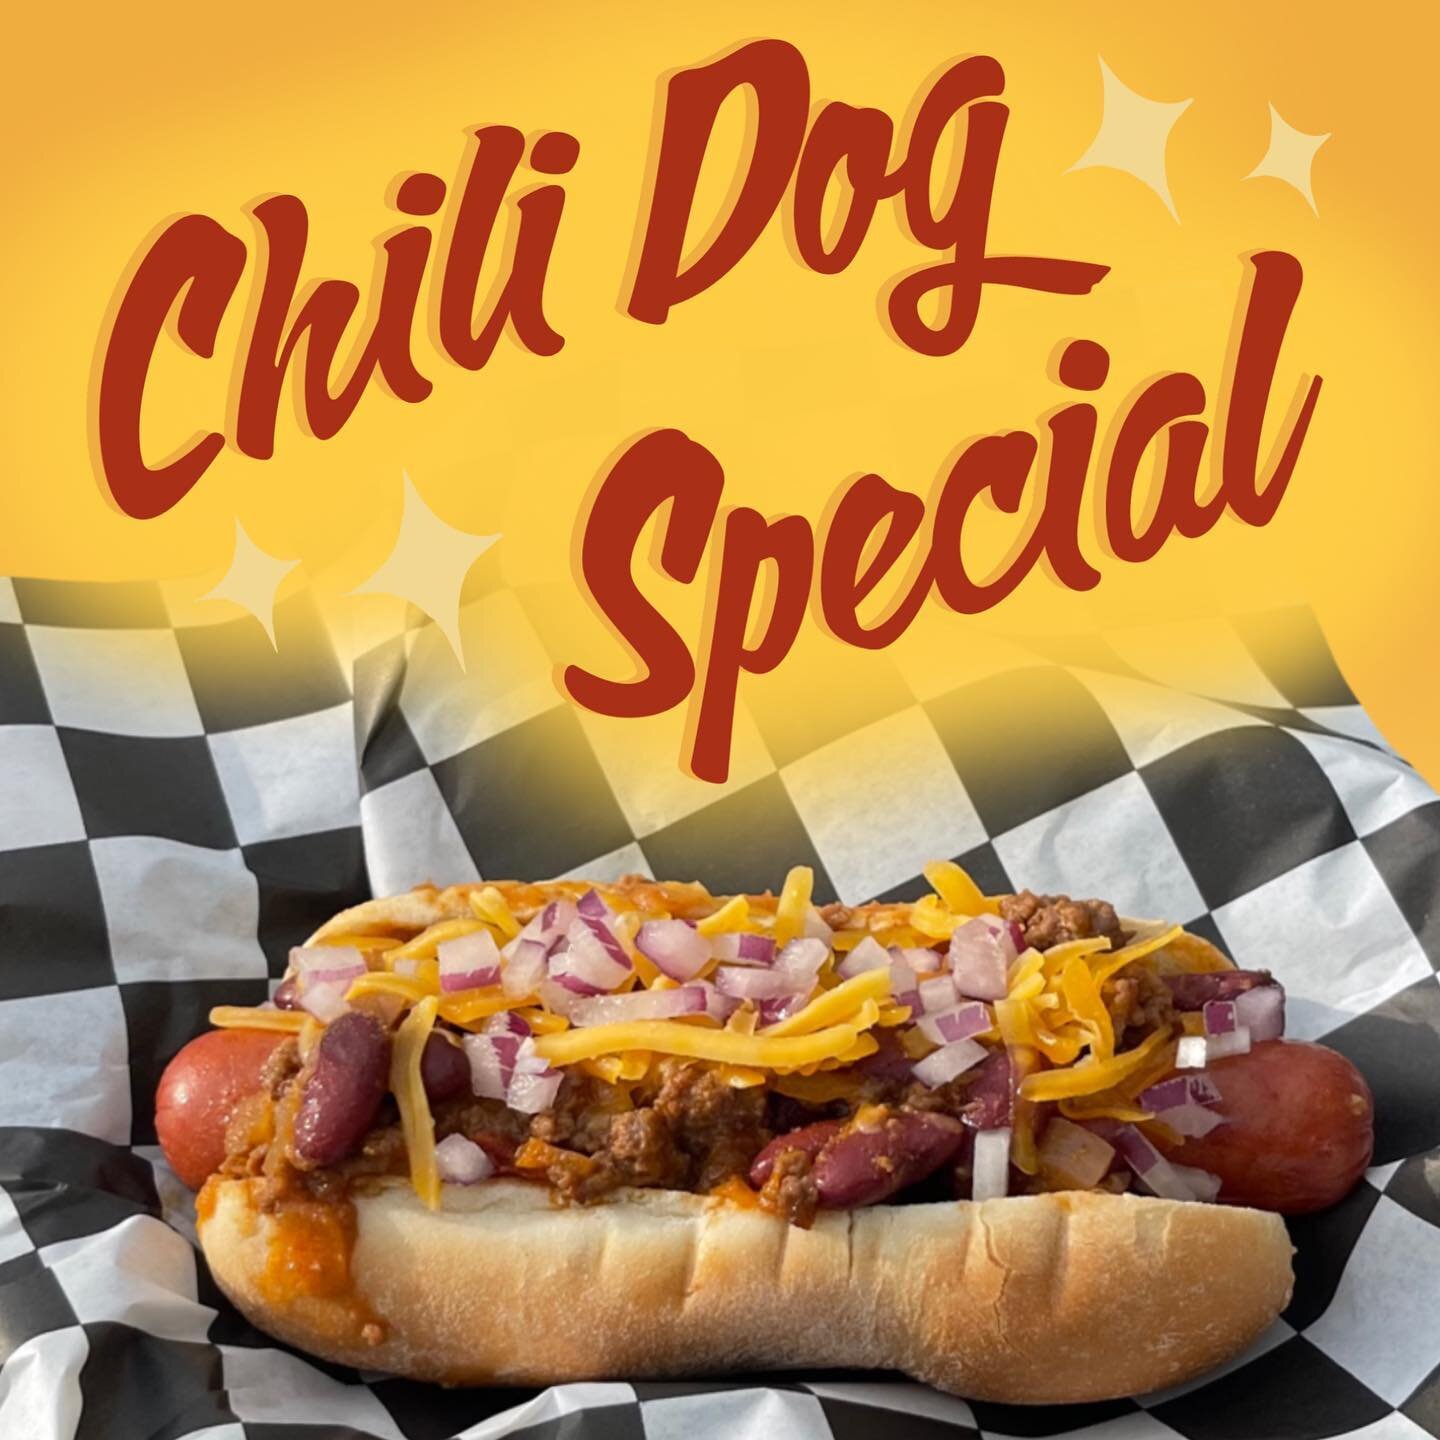 Come suck on this chili dog! 🫡🌭🇺🇸Toasted bun, beef dog, beef n bean chili, shredded cheddar and red onions 🤤